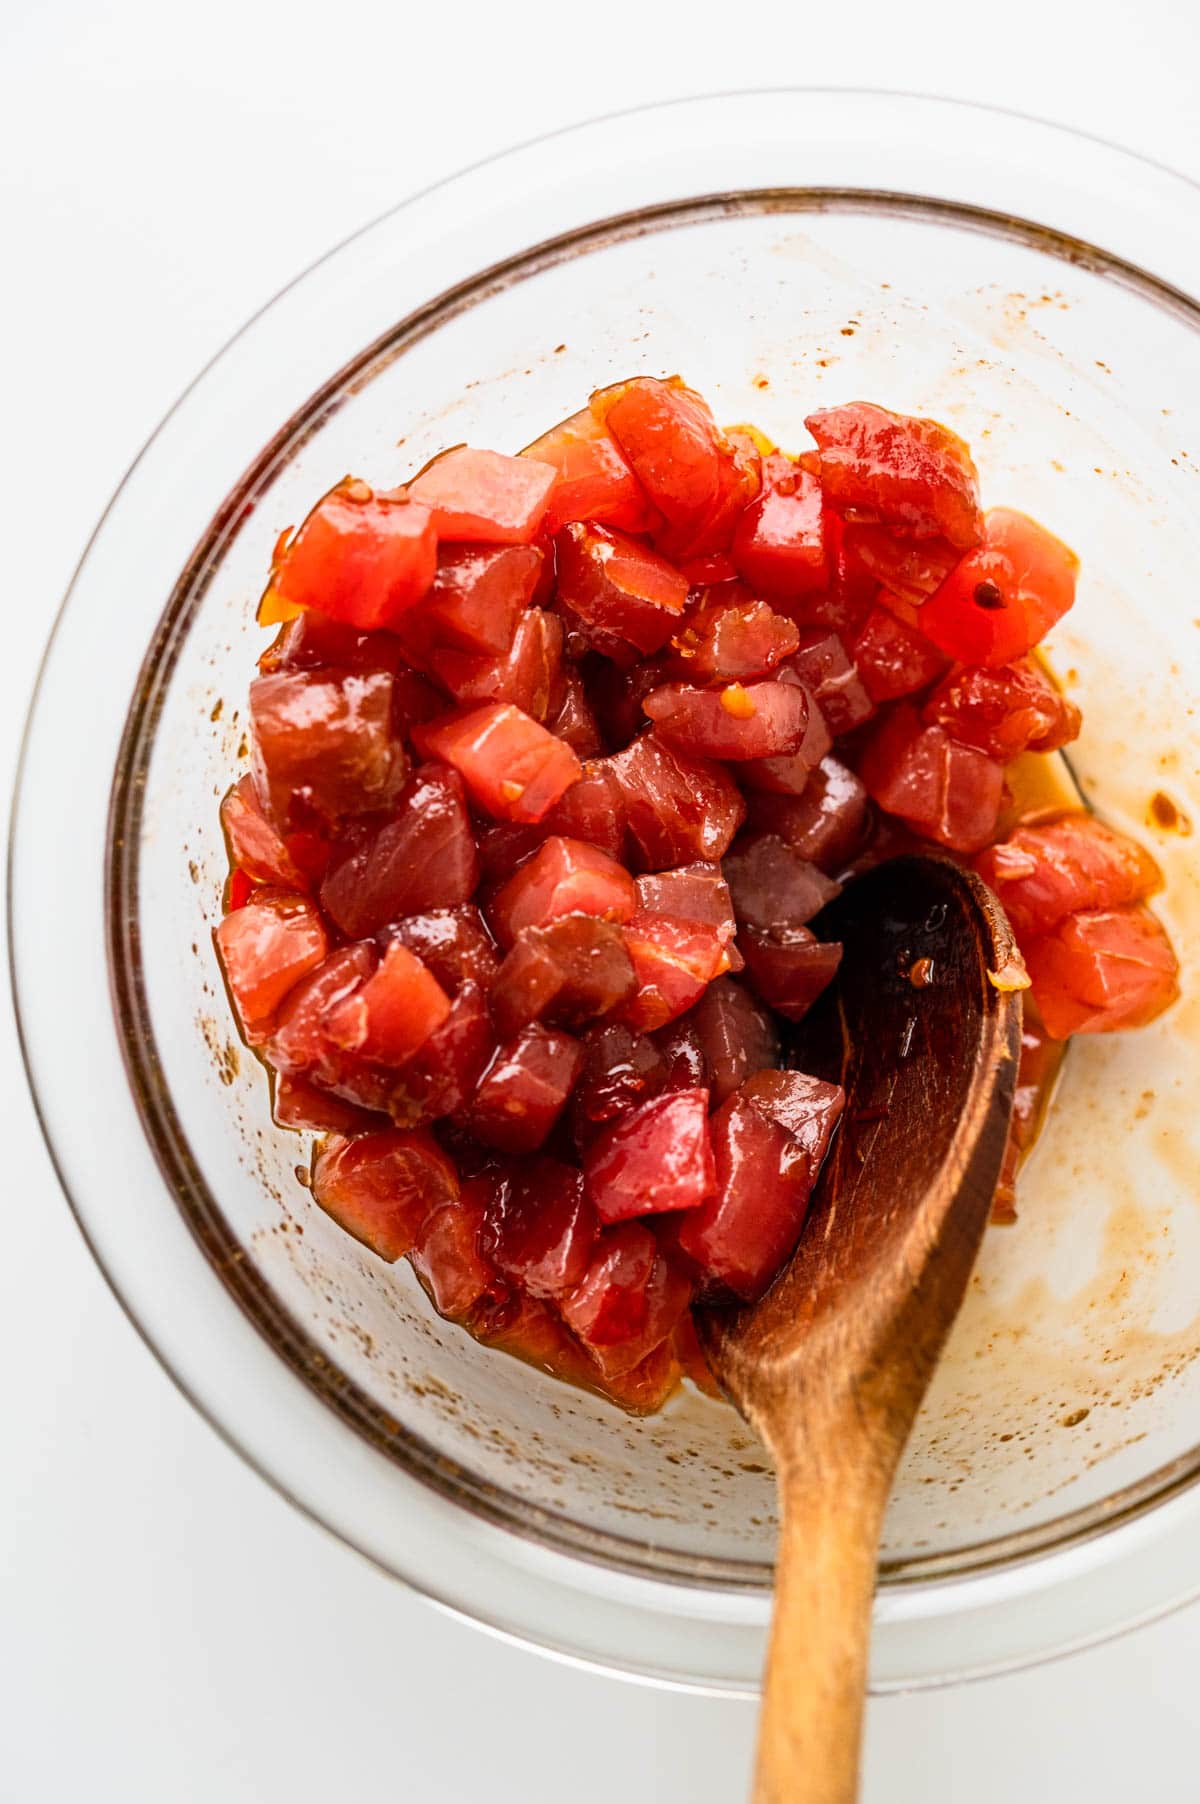 Gently mix the tuna and poke sauce in a bowl.